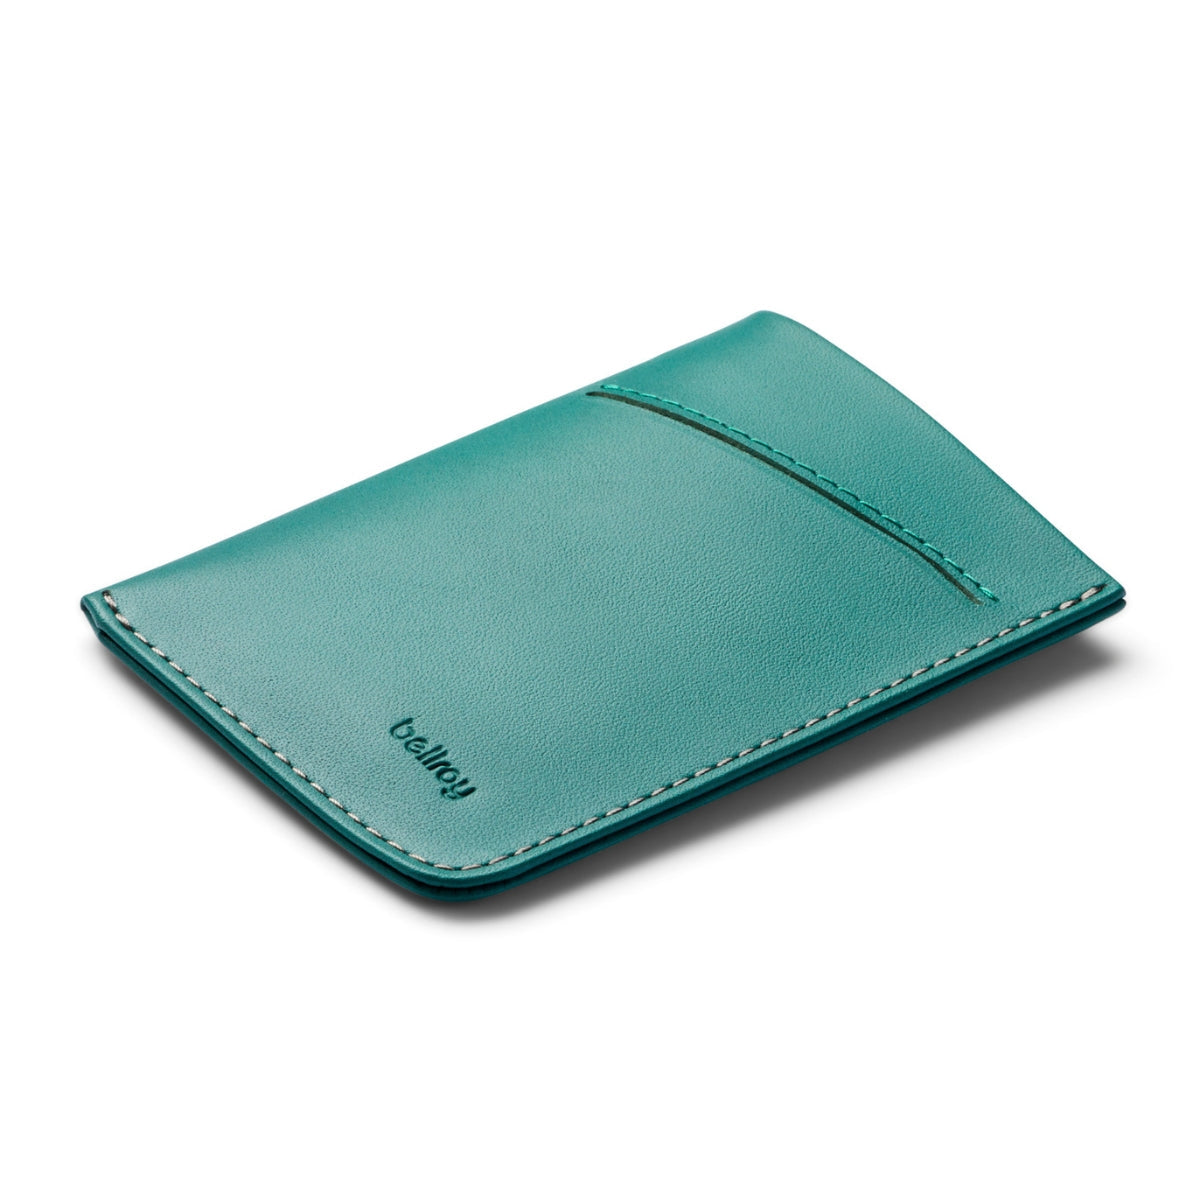 Bellroy Card Sleeve (Second Edition) in Teal